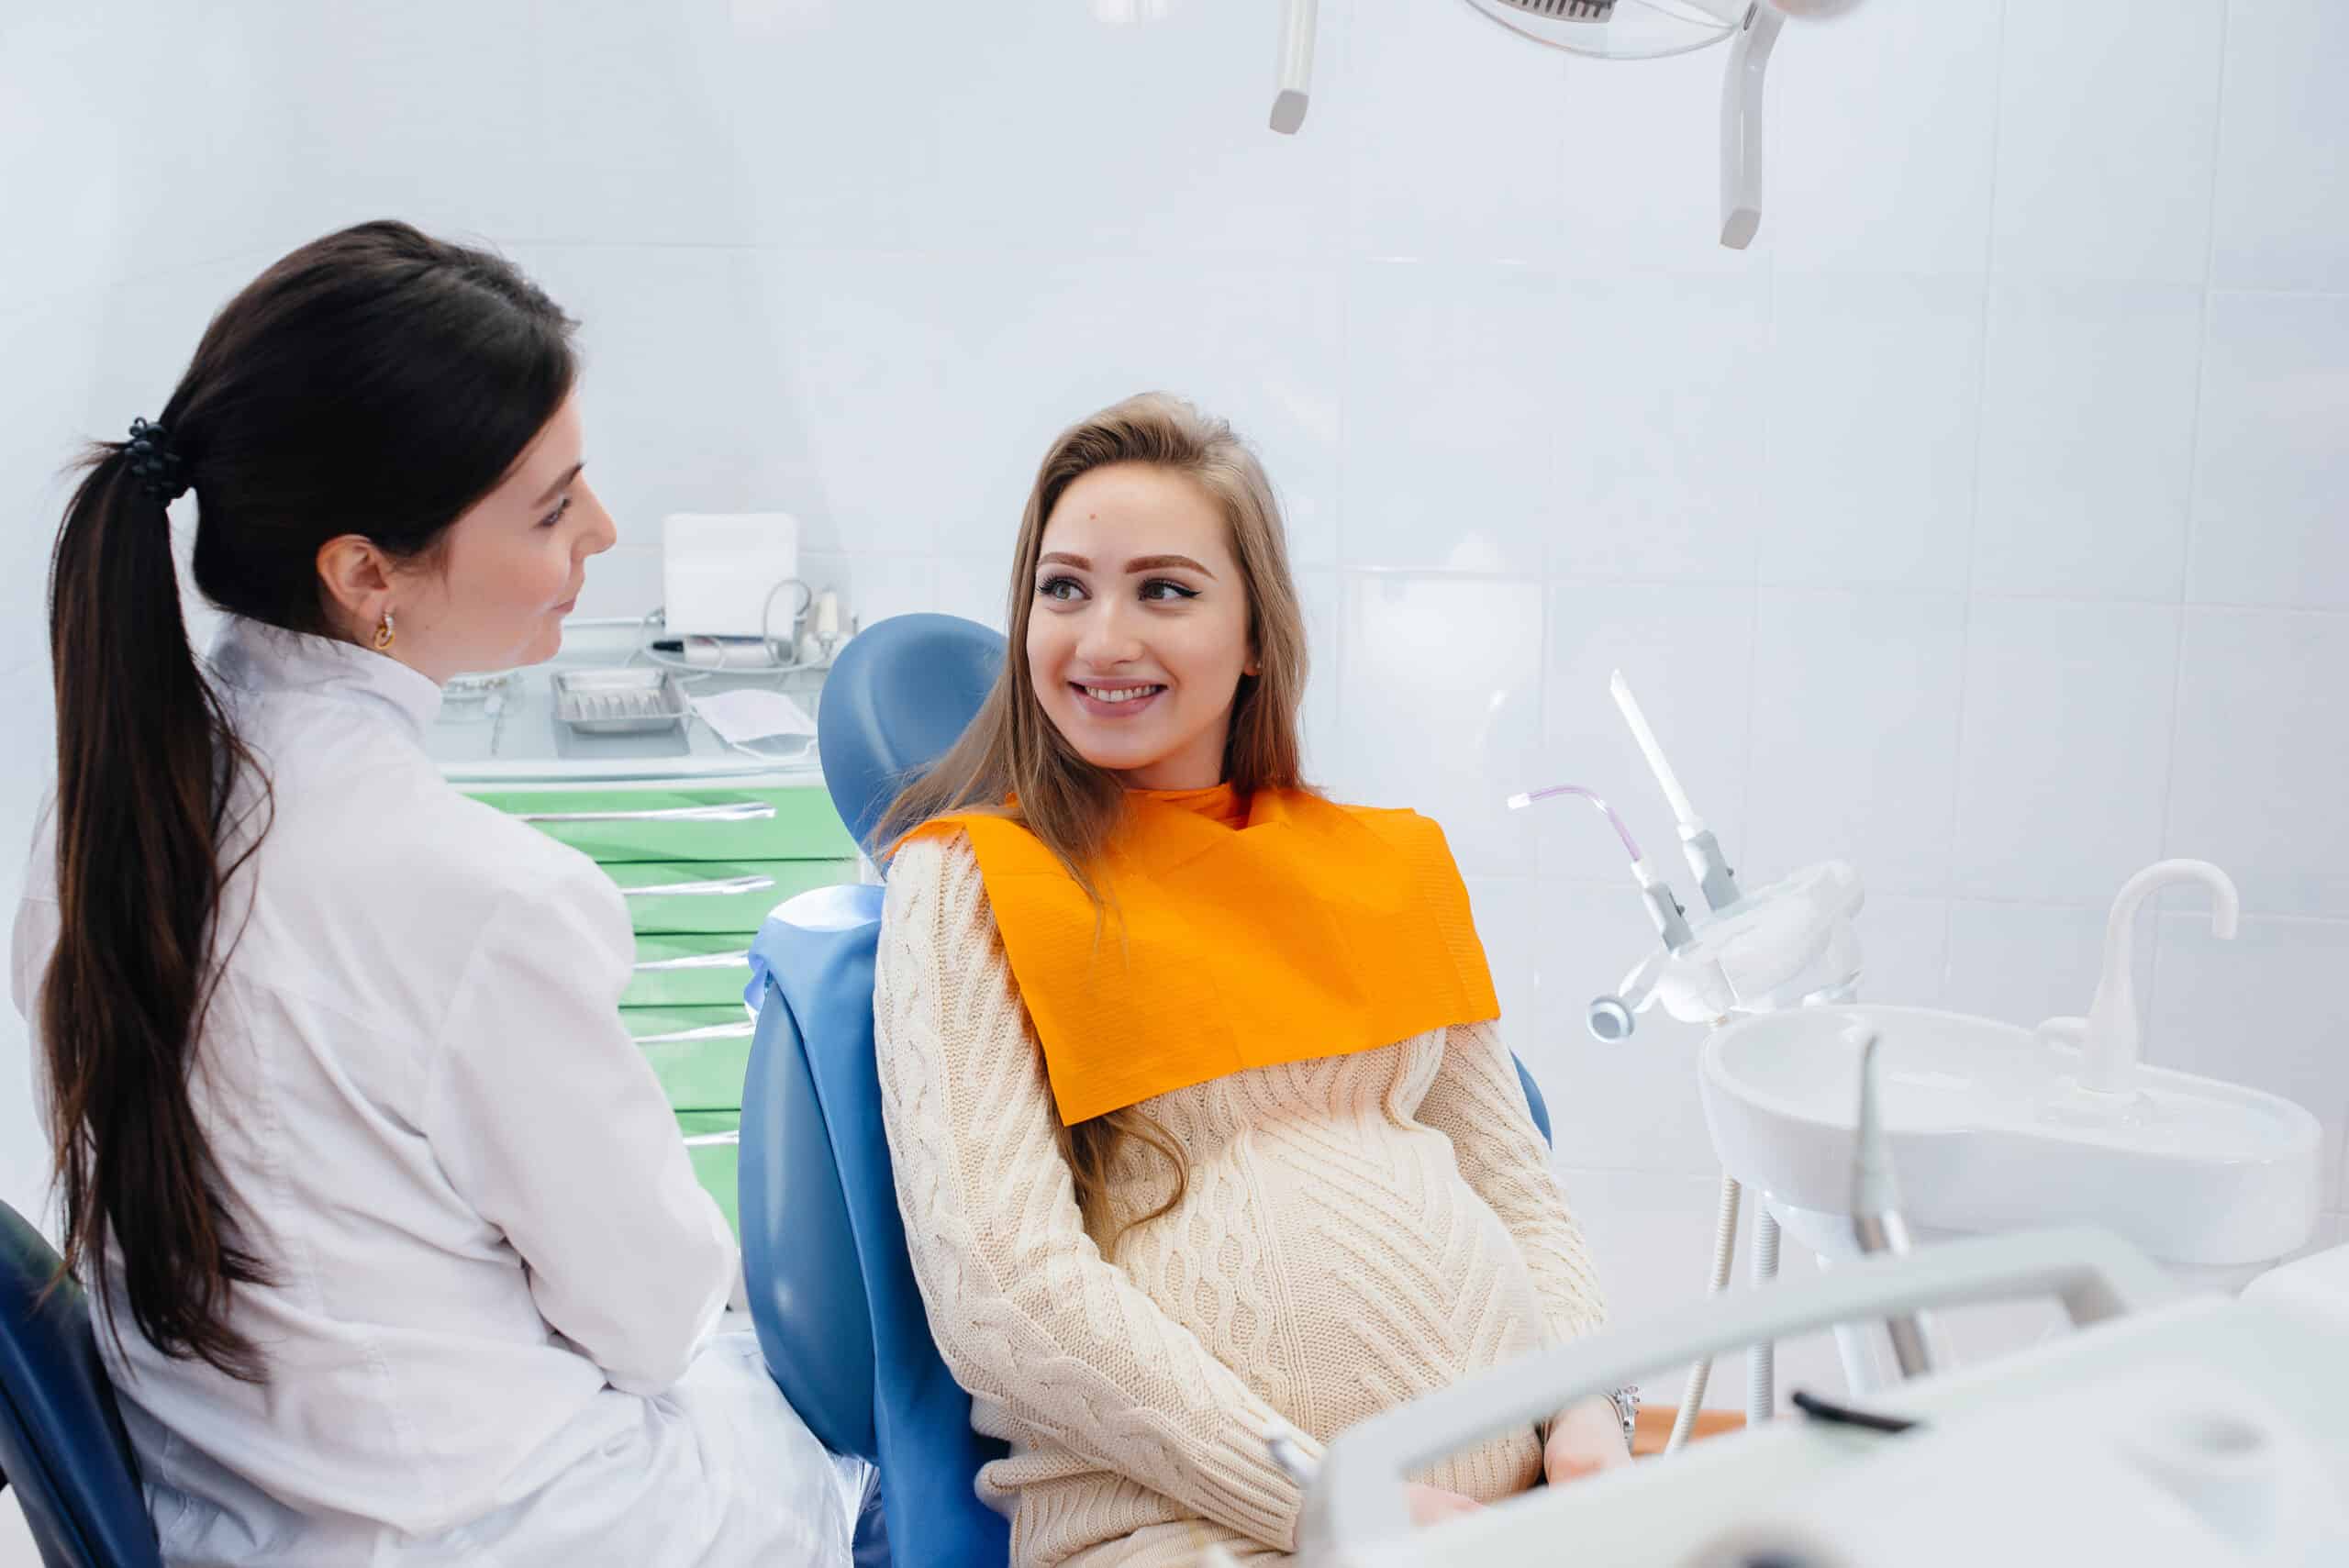 A professional dentist treats and examines the oral cavity of a pregnant girl in a modern dental office